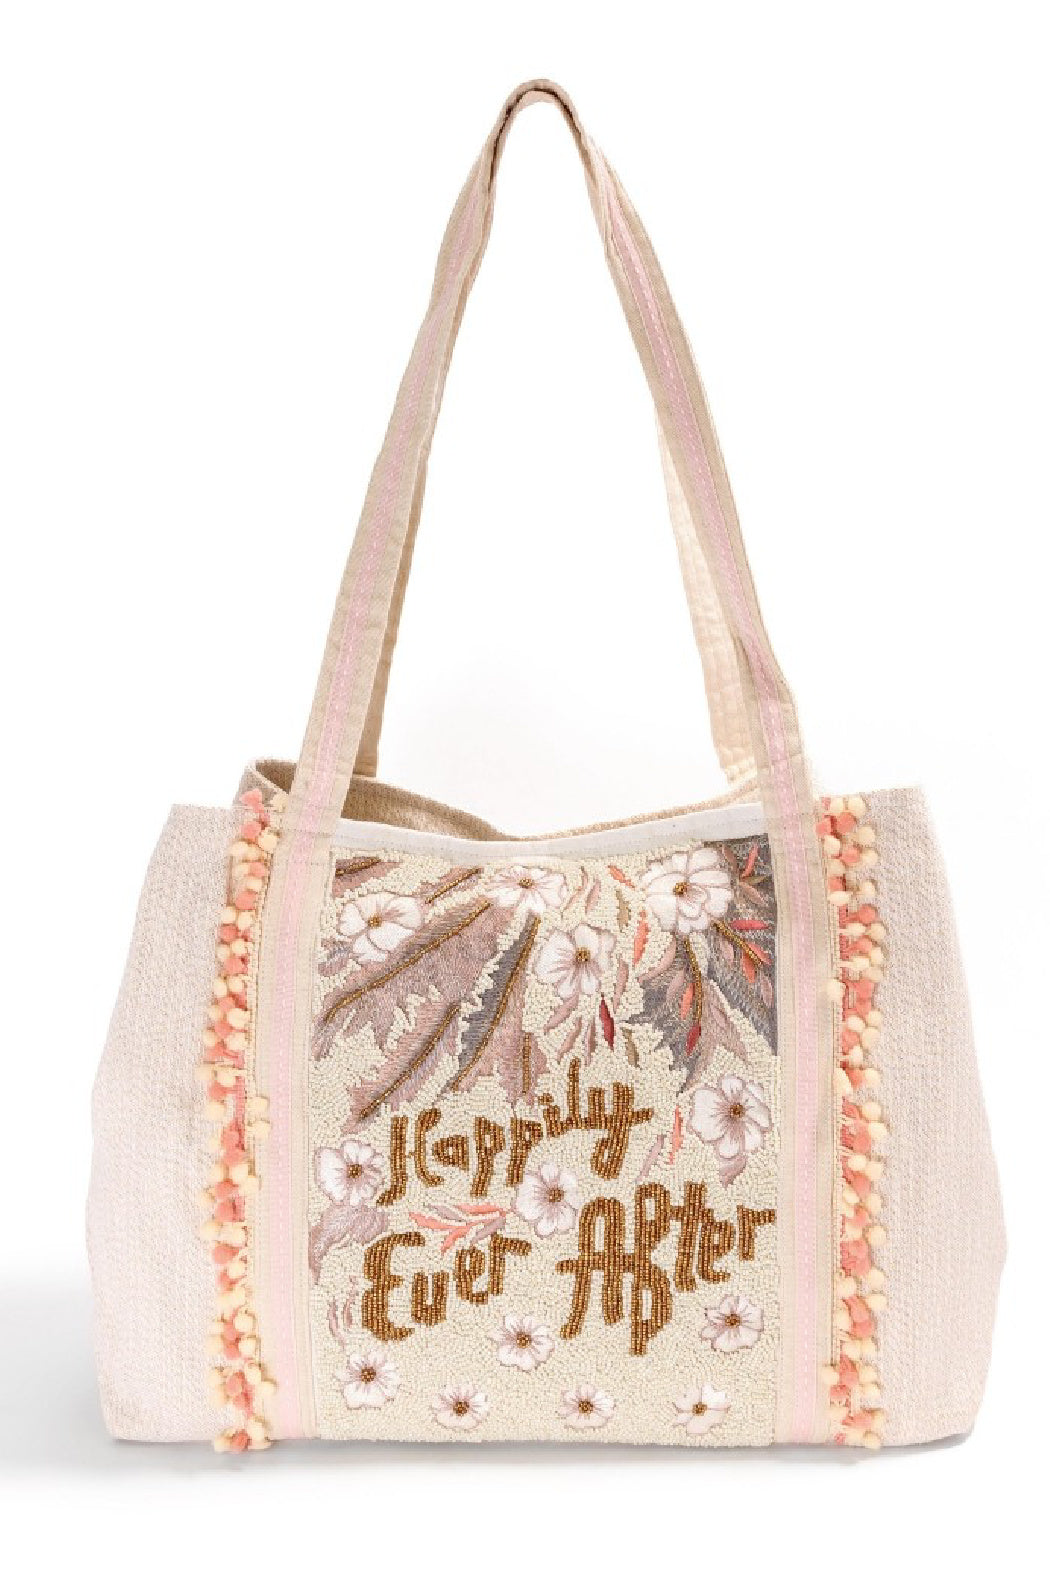 Happily Ever After Tote Bag